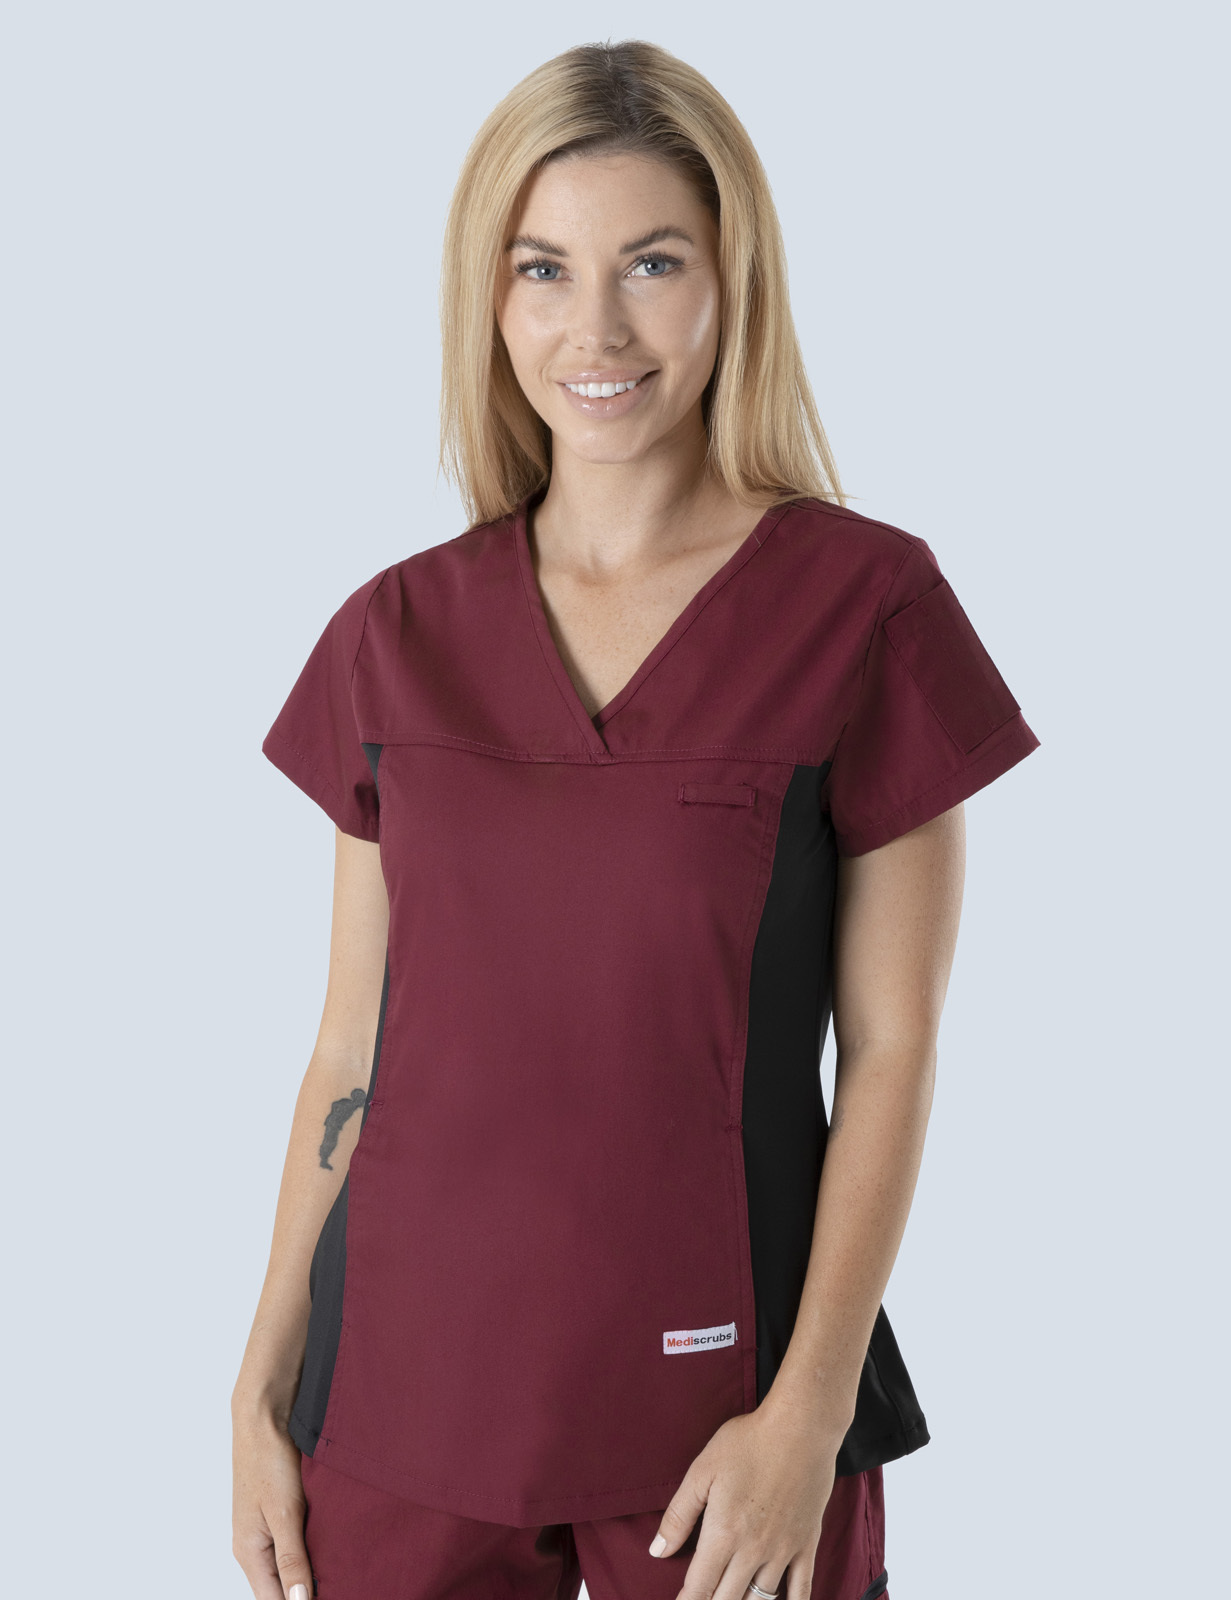 Women's Fit Solid Scrub Top With Spandex Panel - Burgundy - Large